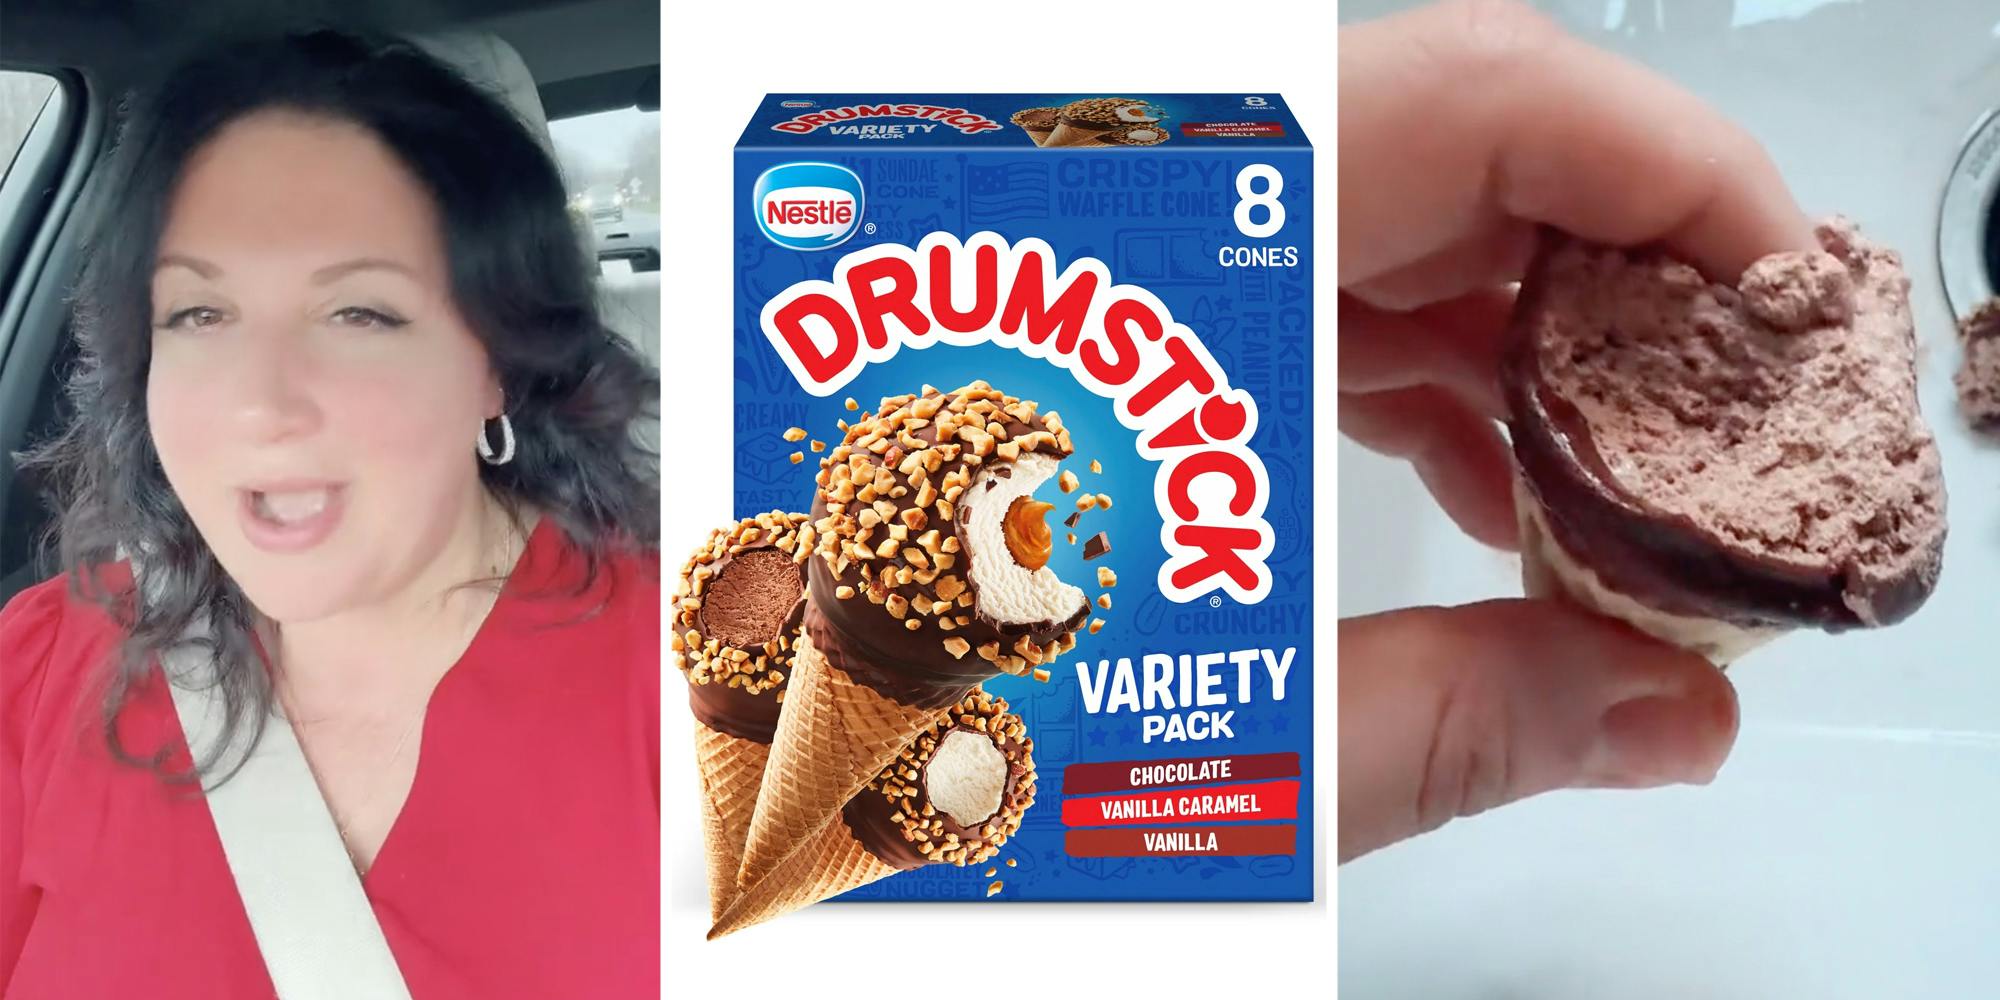 The Reason Why Drumstick Ice Cream Remains Solid, Biomedical Engineer Reveals the Science Behind